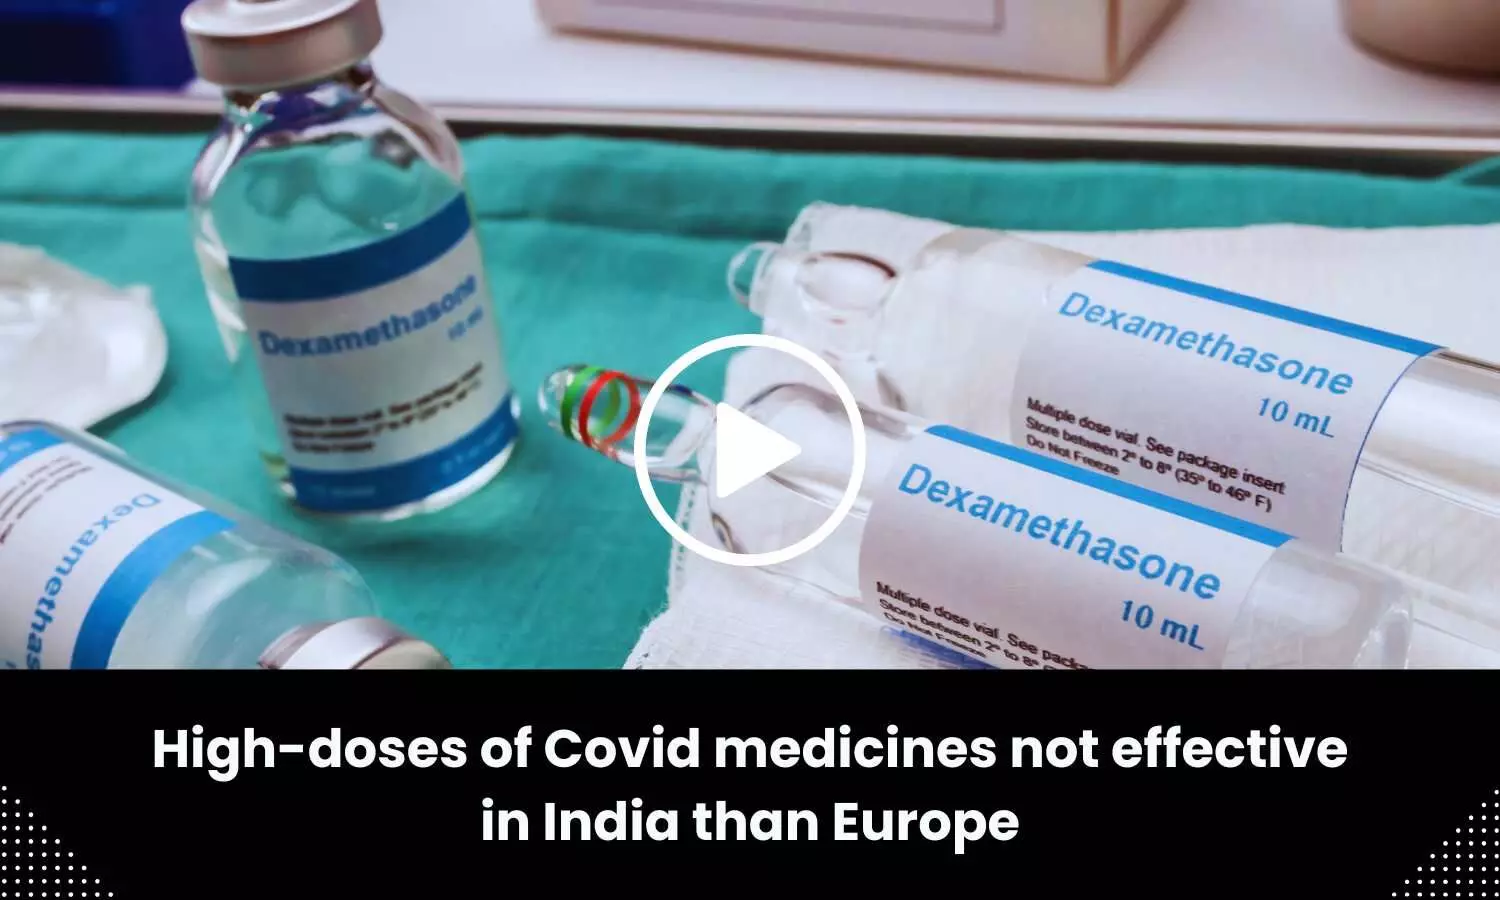 High-doses of Covid medicines not effective in India than Europe